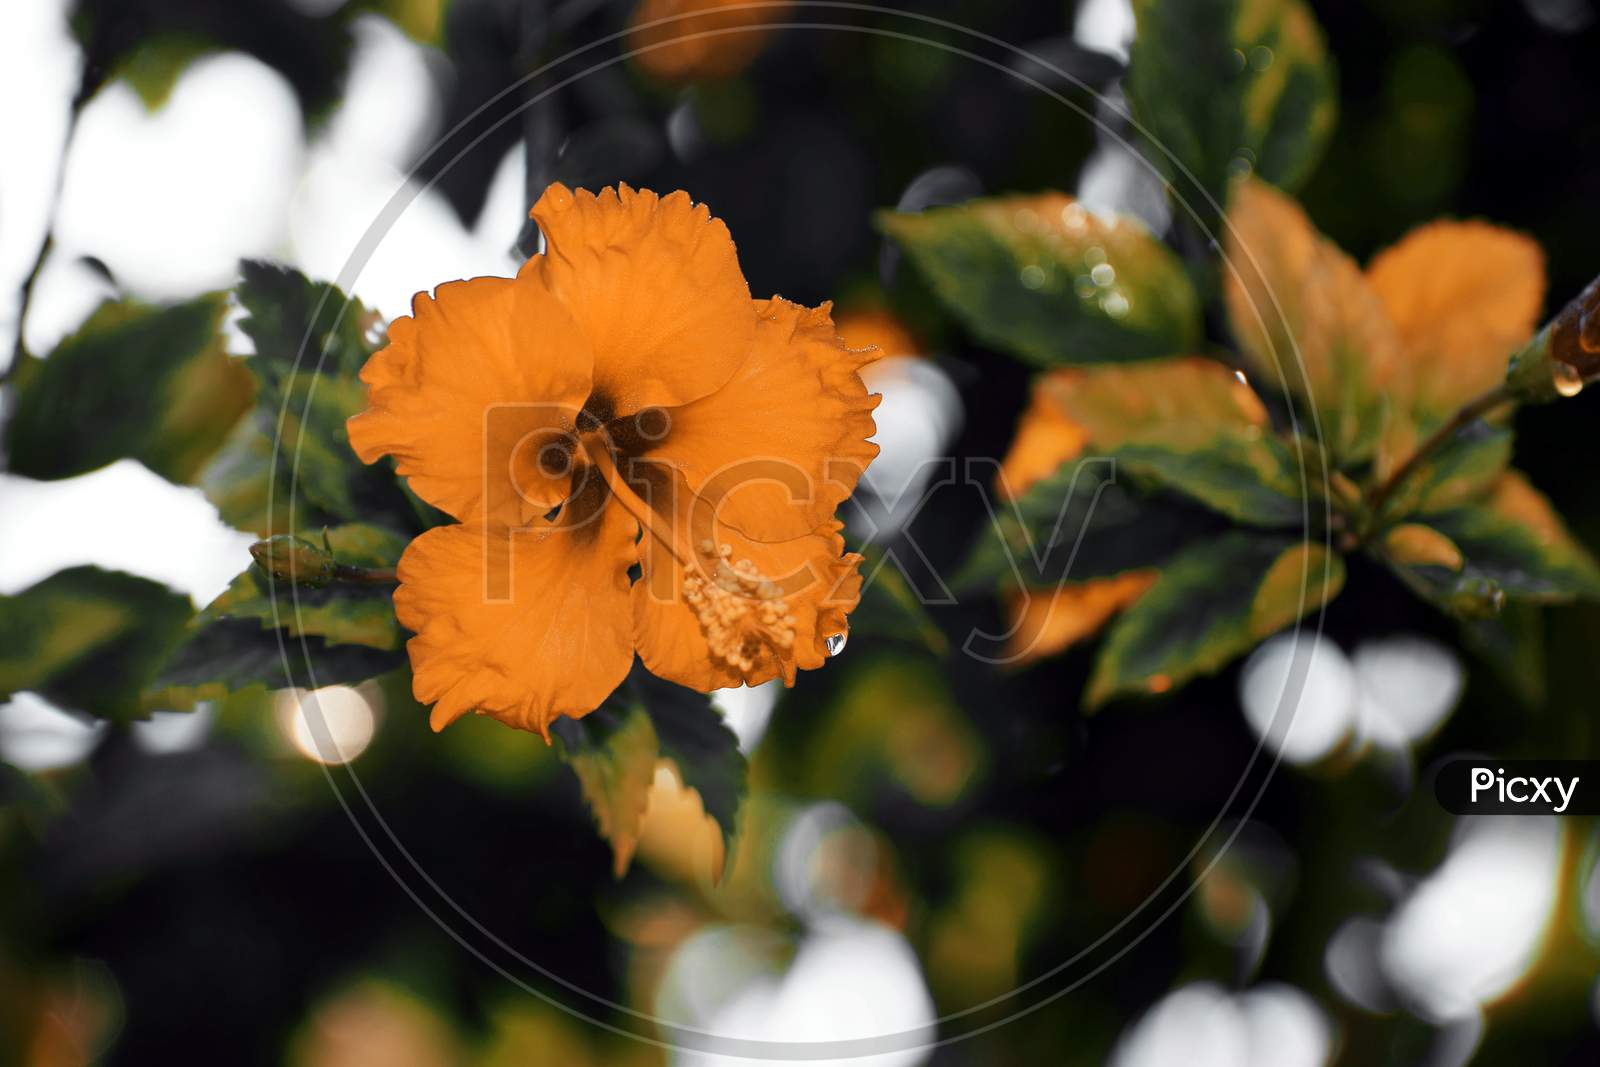 Beautiful Picture Of Yellow Flower And Green Leaves. Background Blur